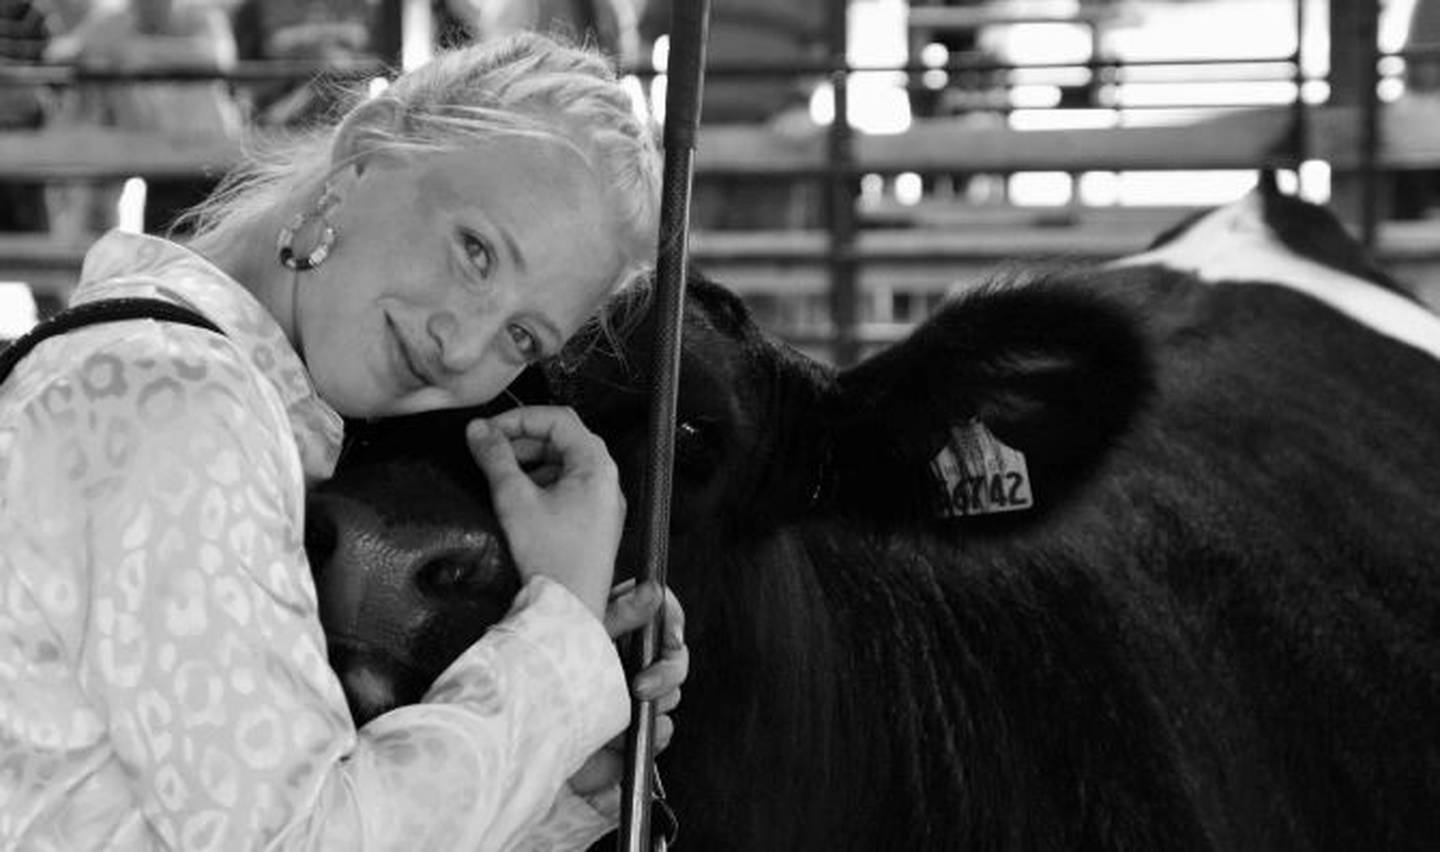 “Best friends” — Jennifer Carlson: “The bond between showman and animal is pure love.”